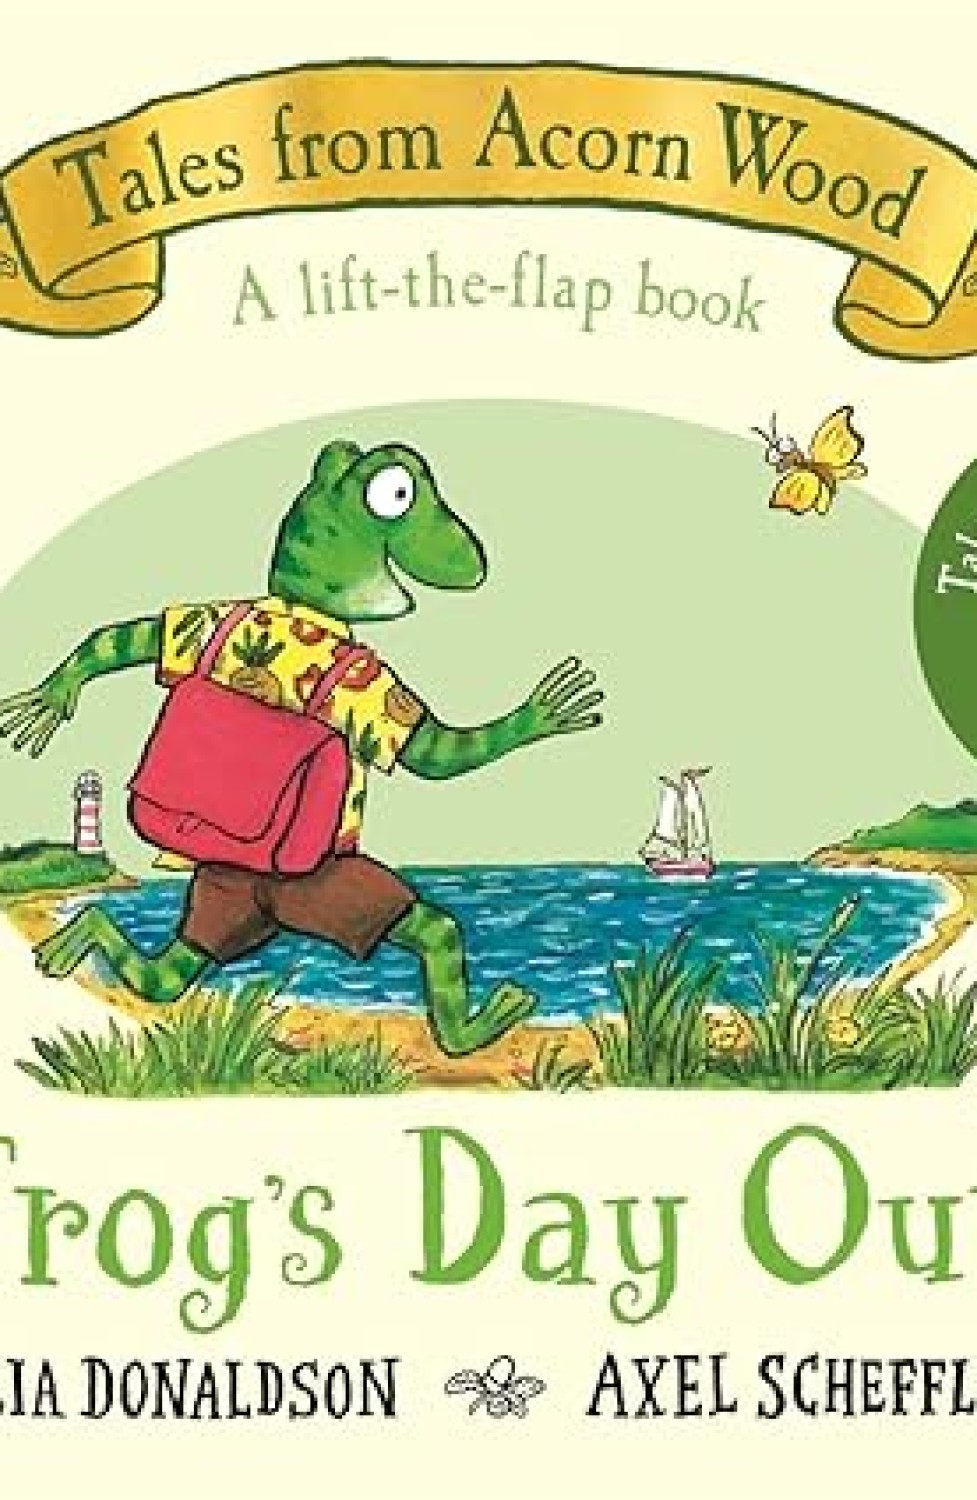 TALES FROM ACORN WOOD : FROG'S DAY OUT